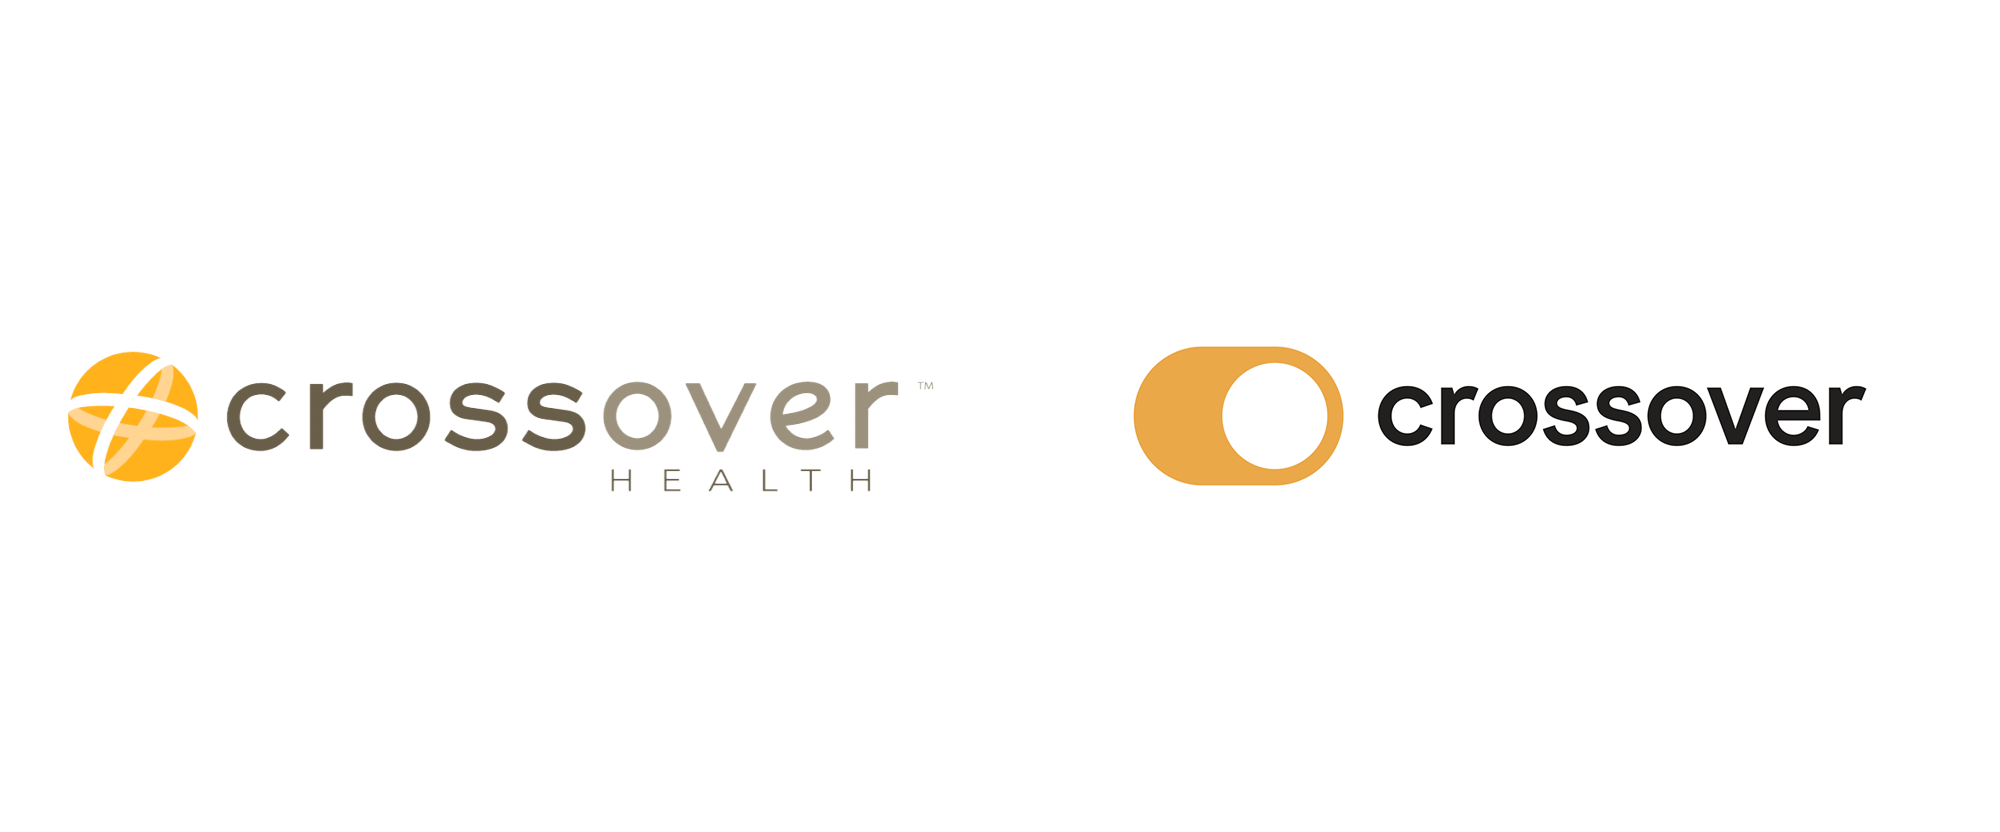 New Logo for Crossover Health by Wolff Olins